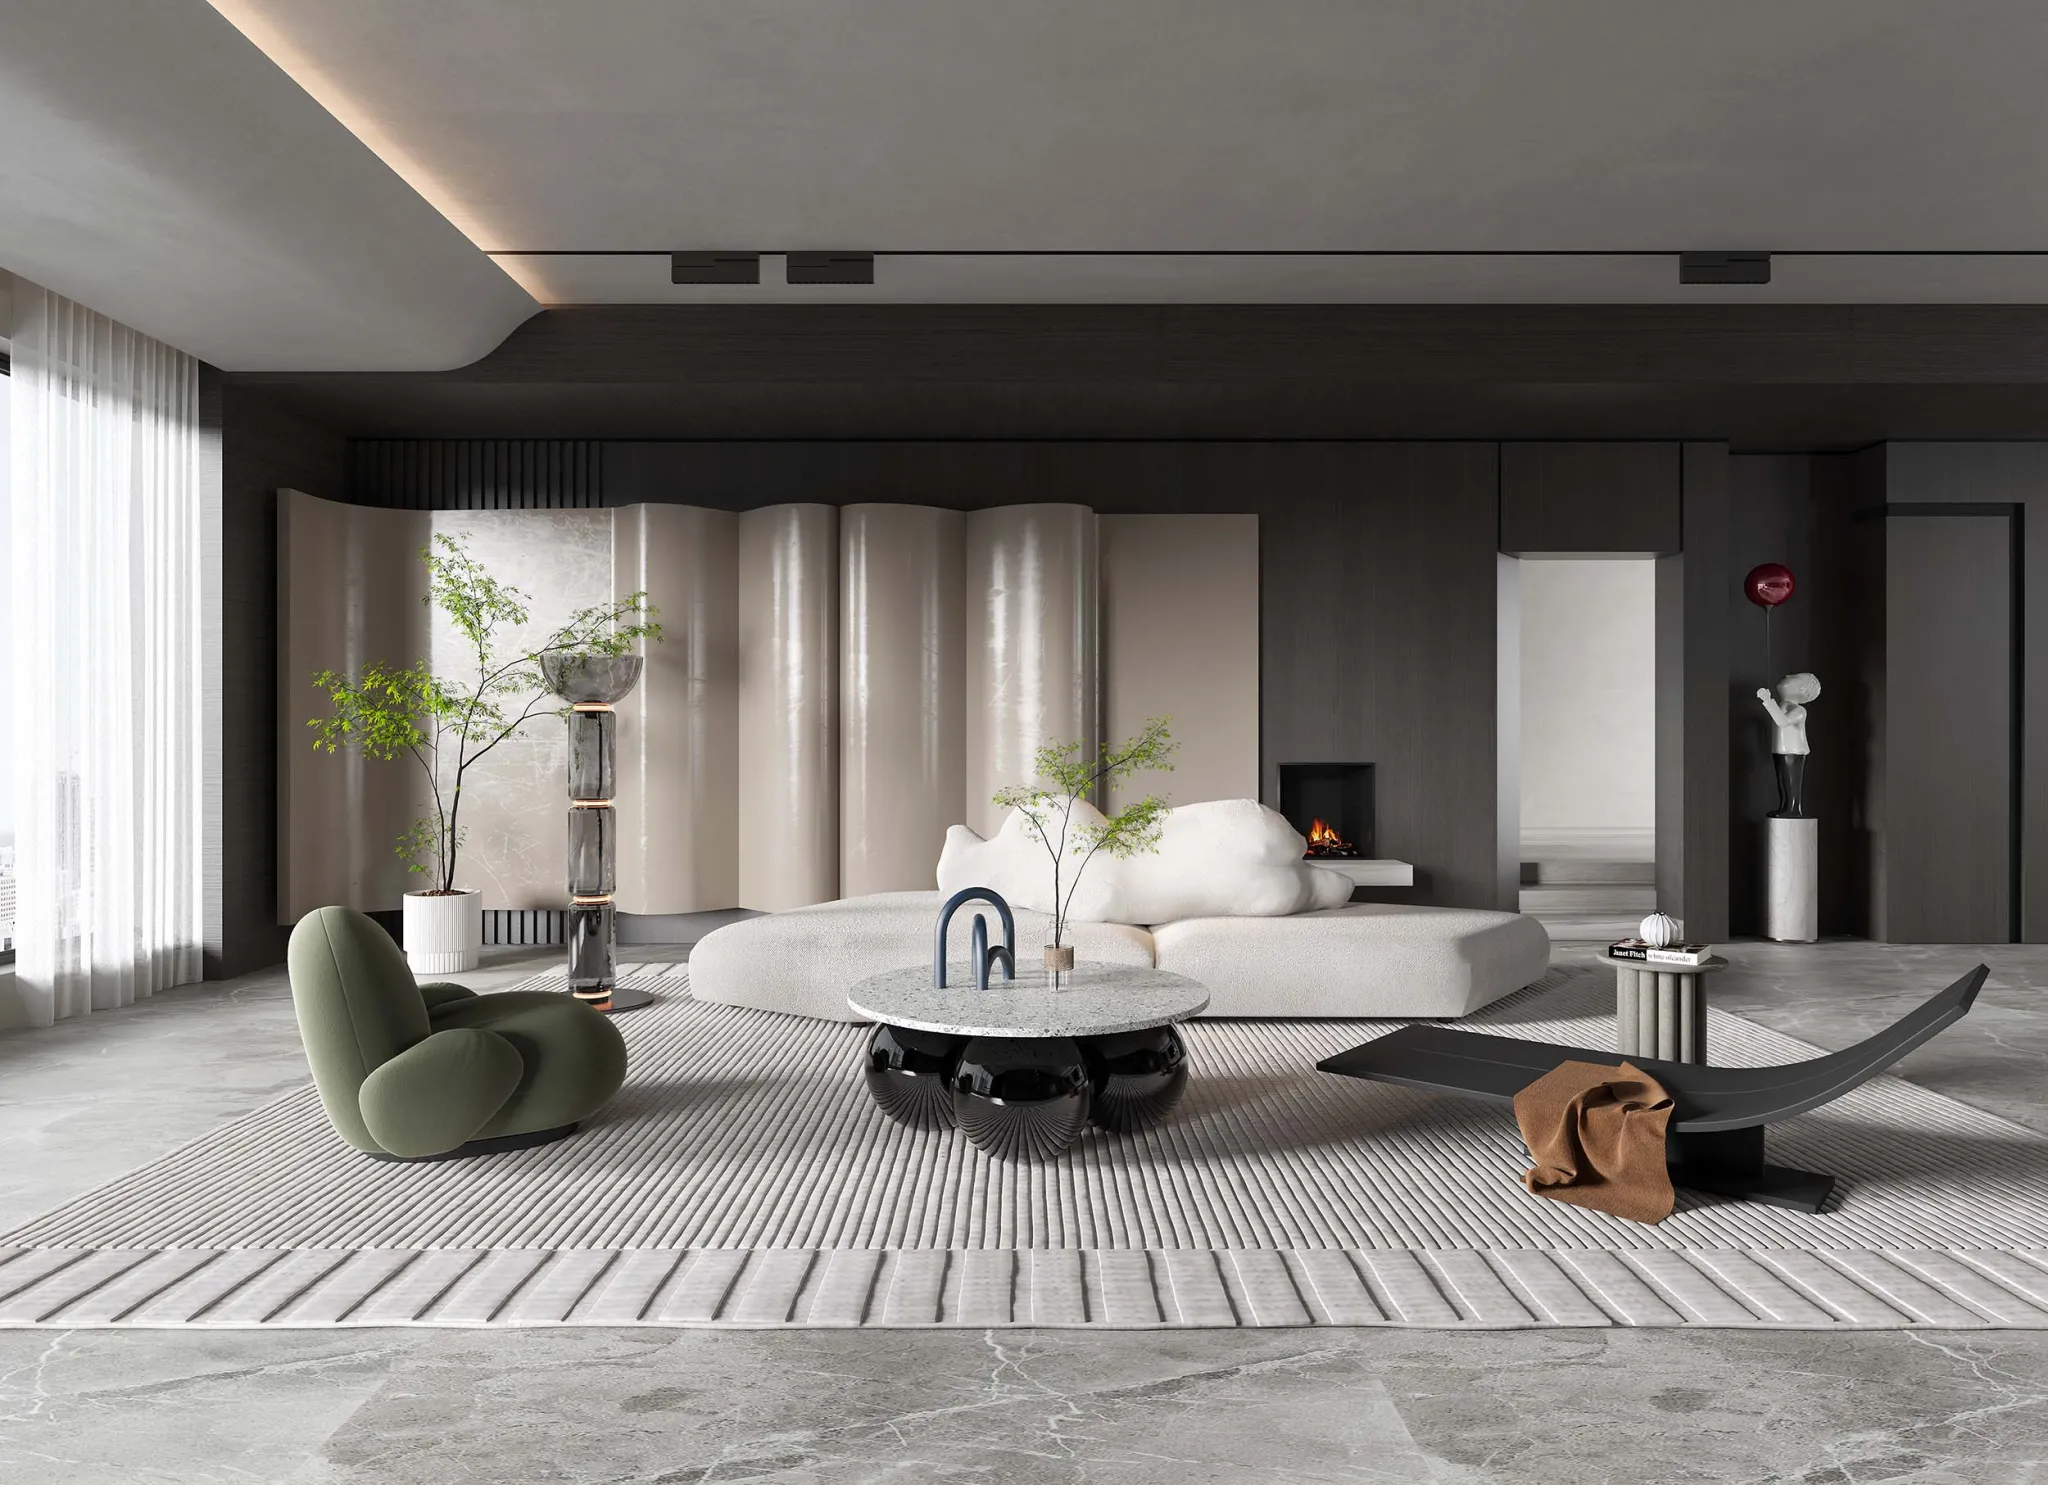 HOUSE SPACE 3D SCENES – LIVING ROOM – 0004